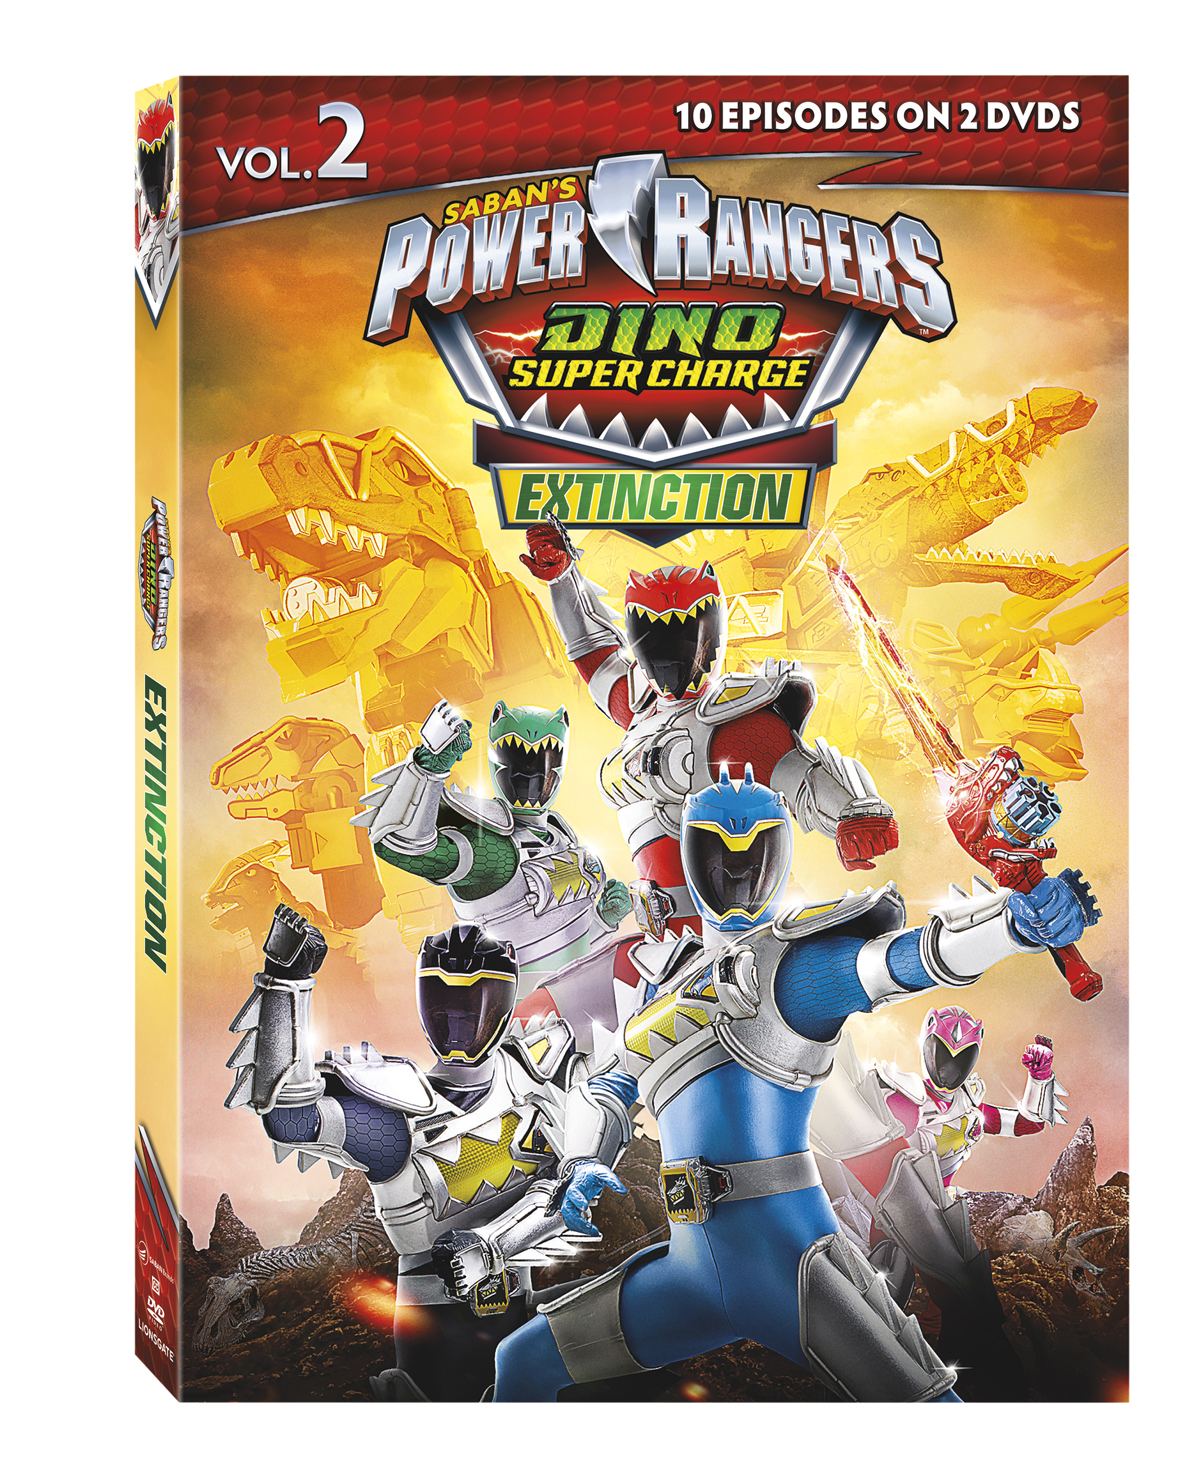 Power Rangers Dino Super Charge Vol.2 Announced - Morphin' Legacy